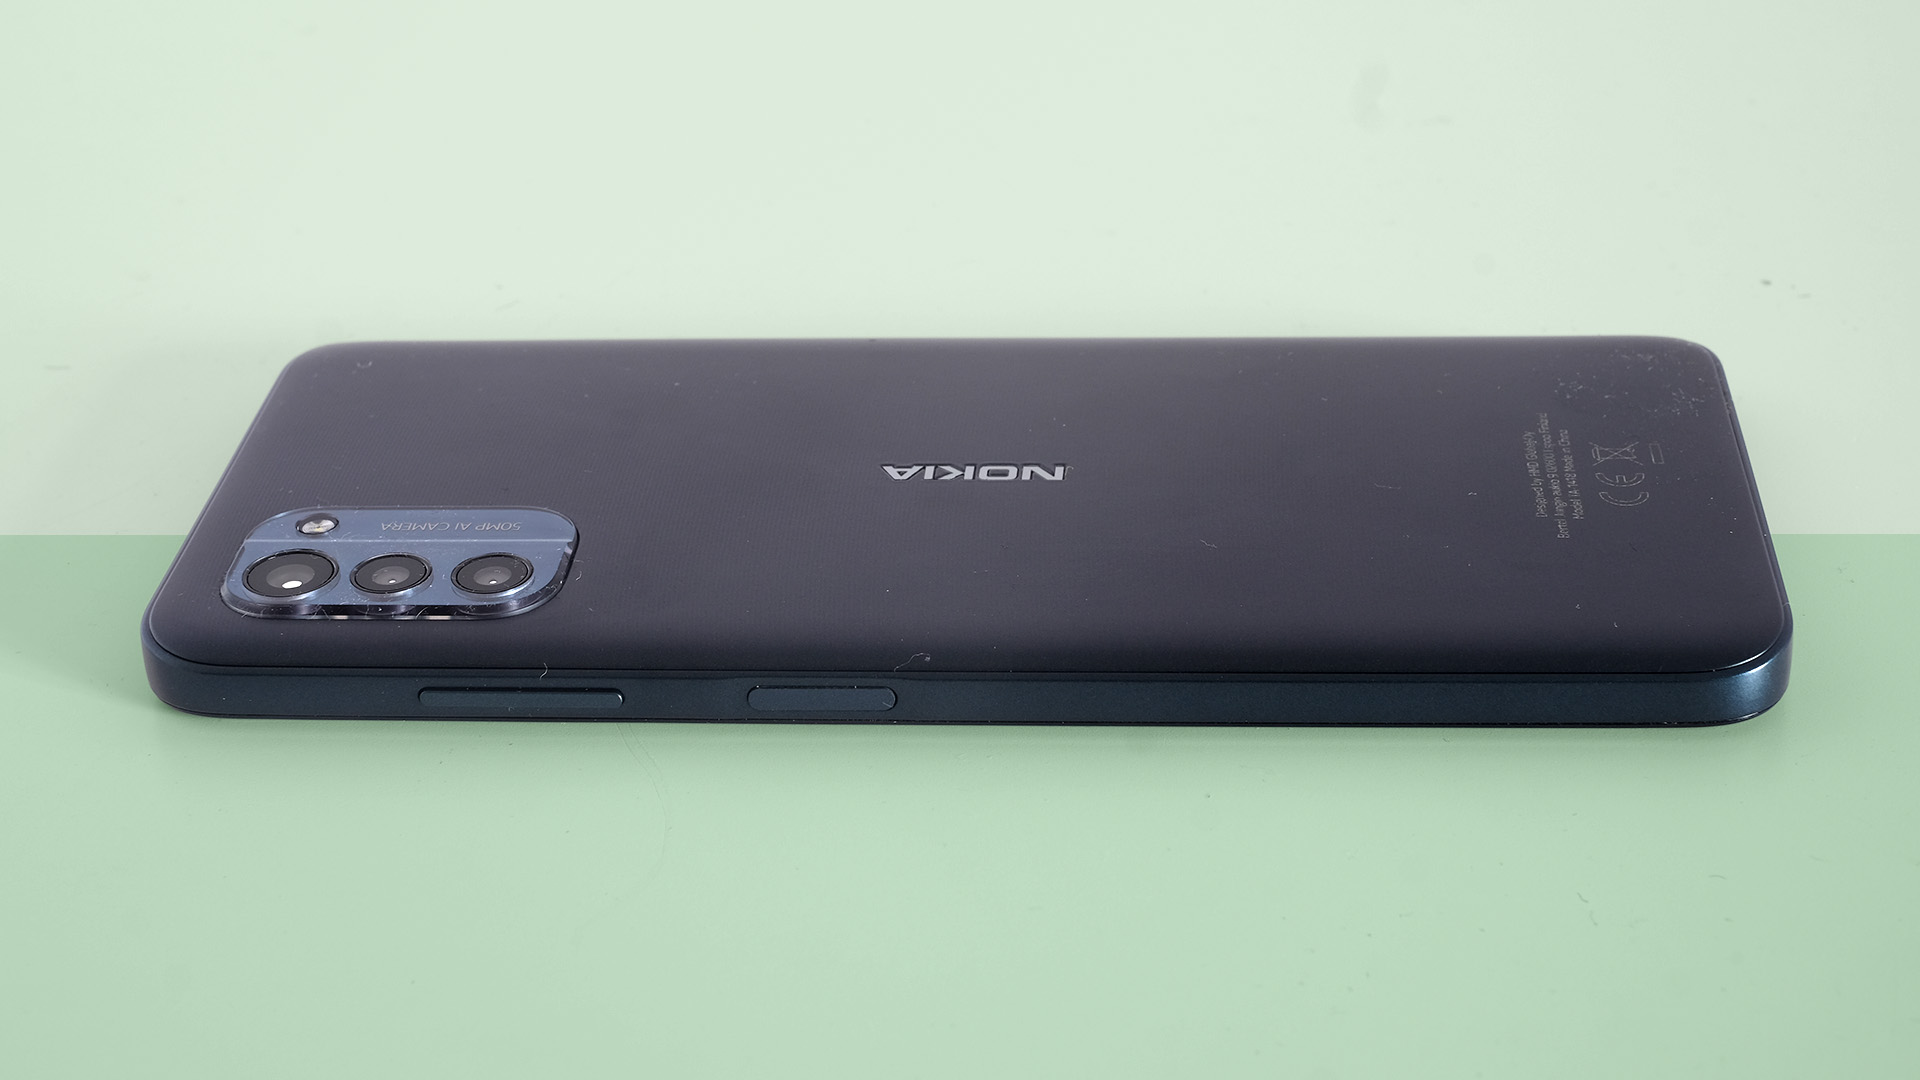 A Nokia G21 on its back, viewed side on